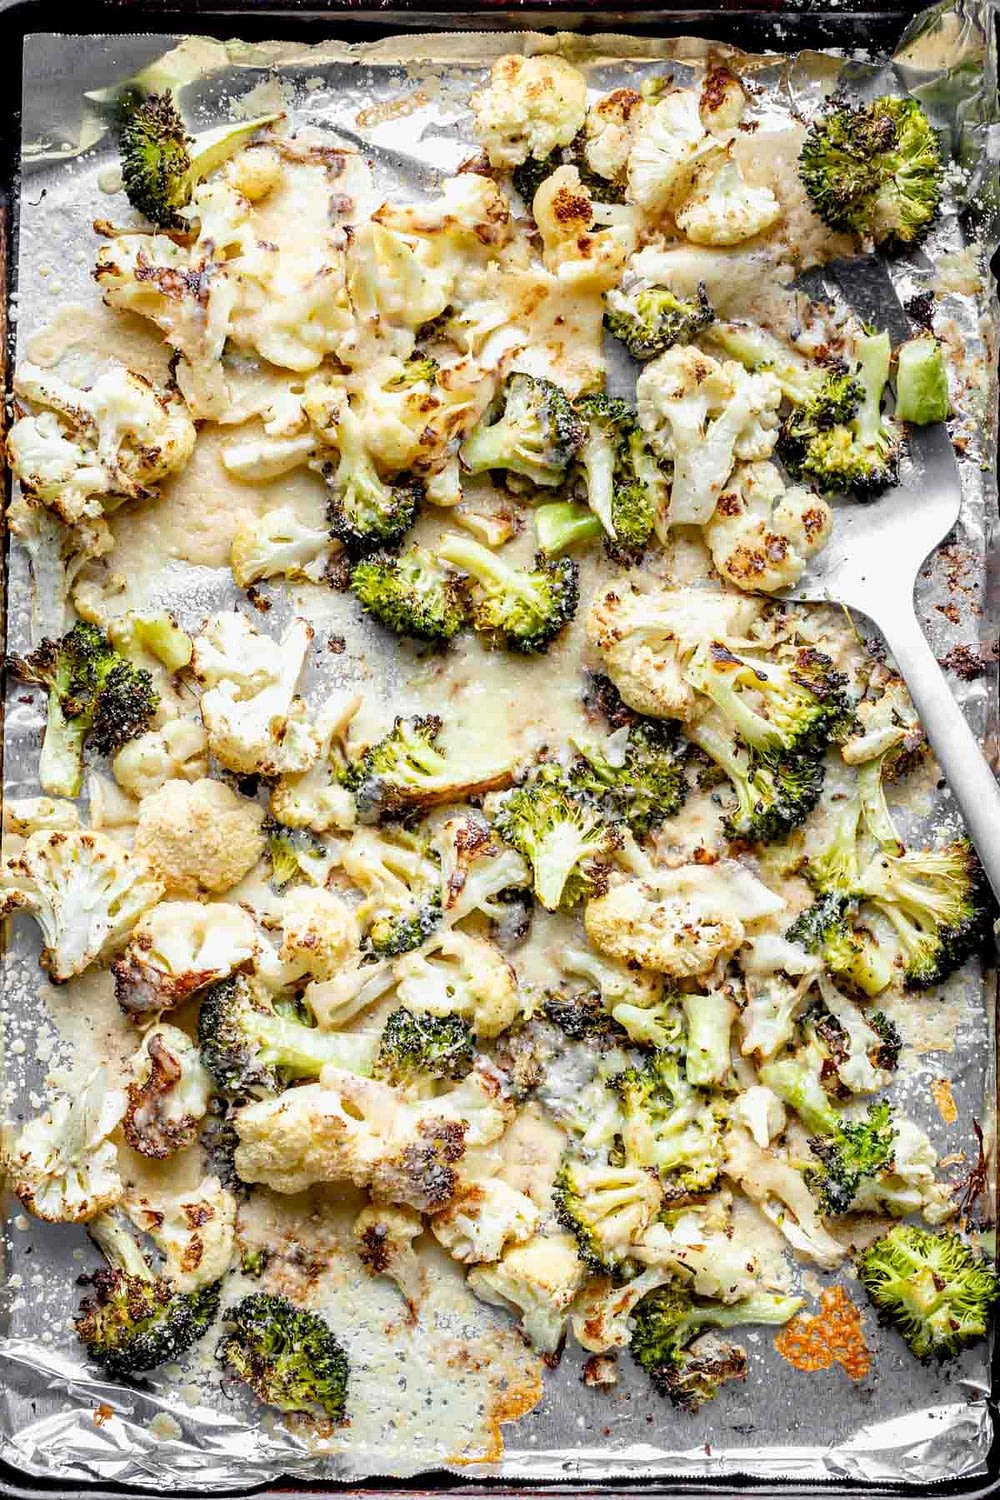 A close up of a sheet pan with roasted broccoli and cauliflower with cheese melted on it.